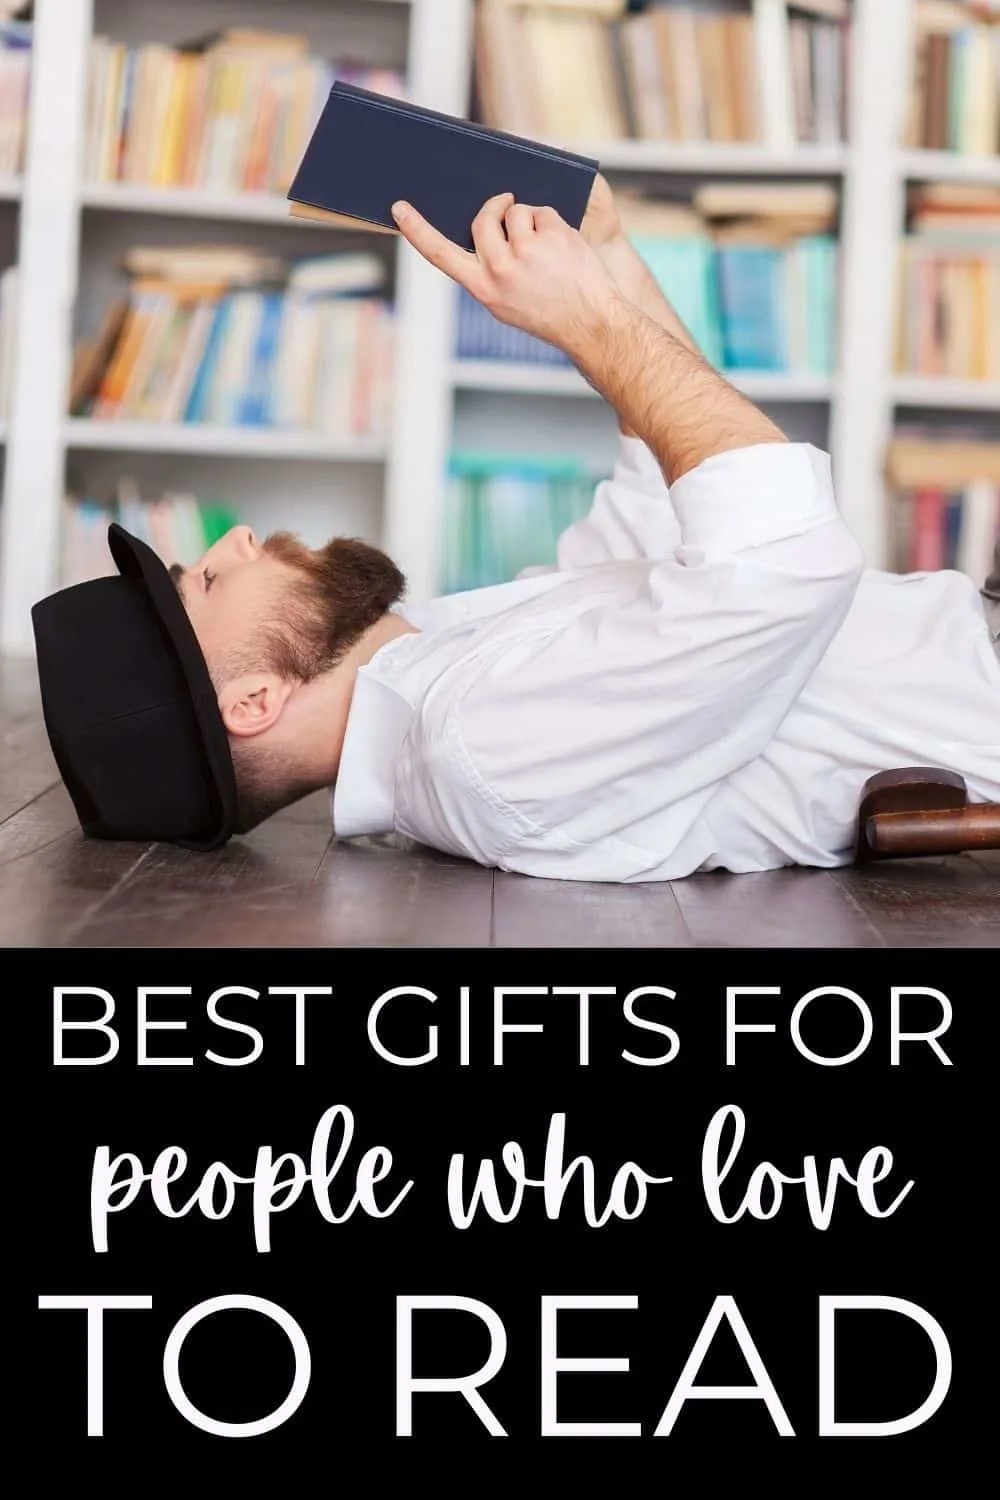 10 Book Gift Ideas for your best lady friend - Delineate Your Dwelling